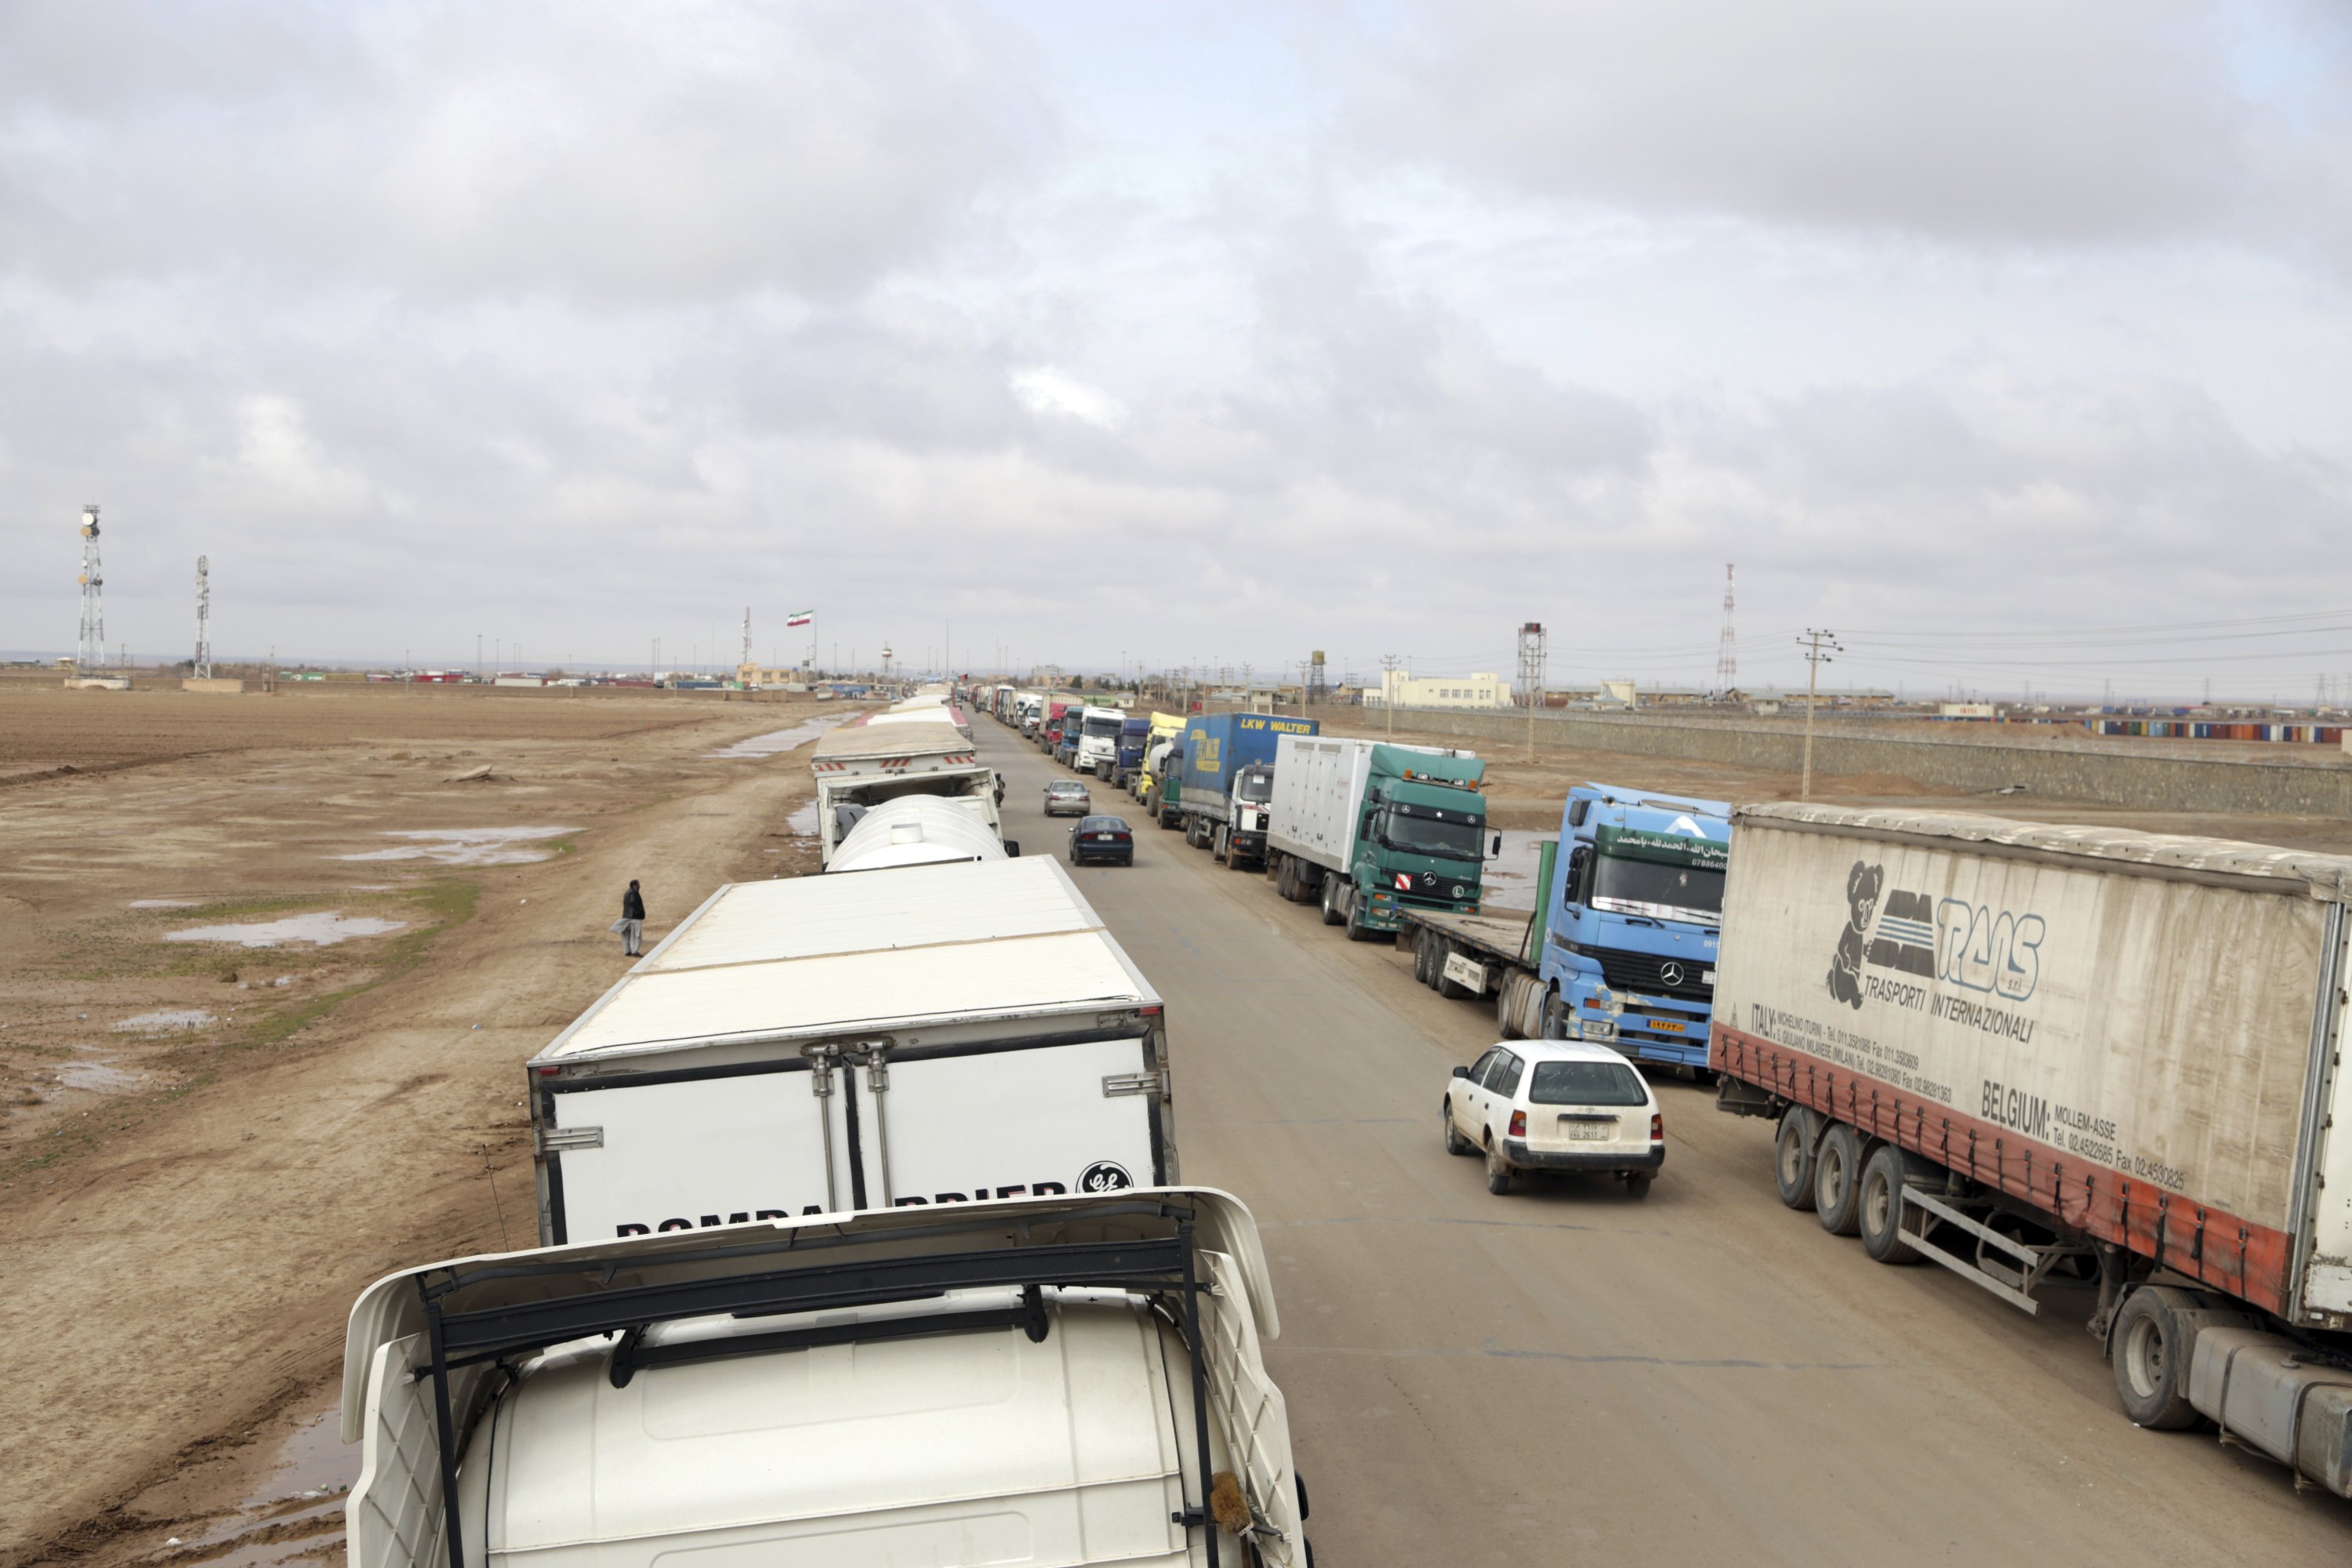 In this Feb. 20, 2019 photo, fuel tankers and trucks are parked on the road at the Islam Qala border with Iran, in Herat Province, west of Kabul, Afghanistan. (AP Photo)